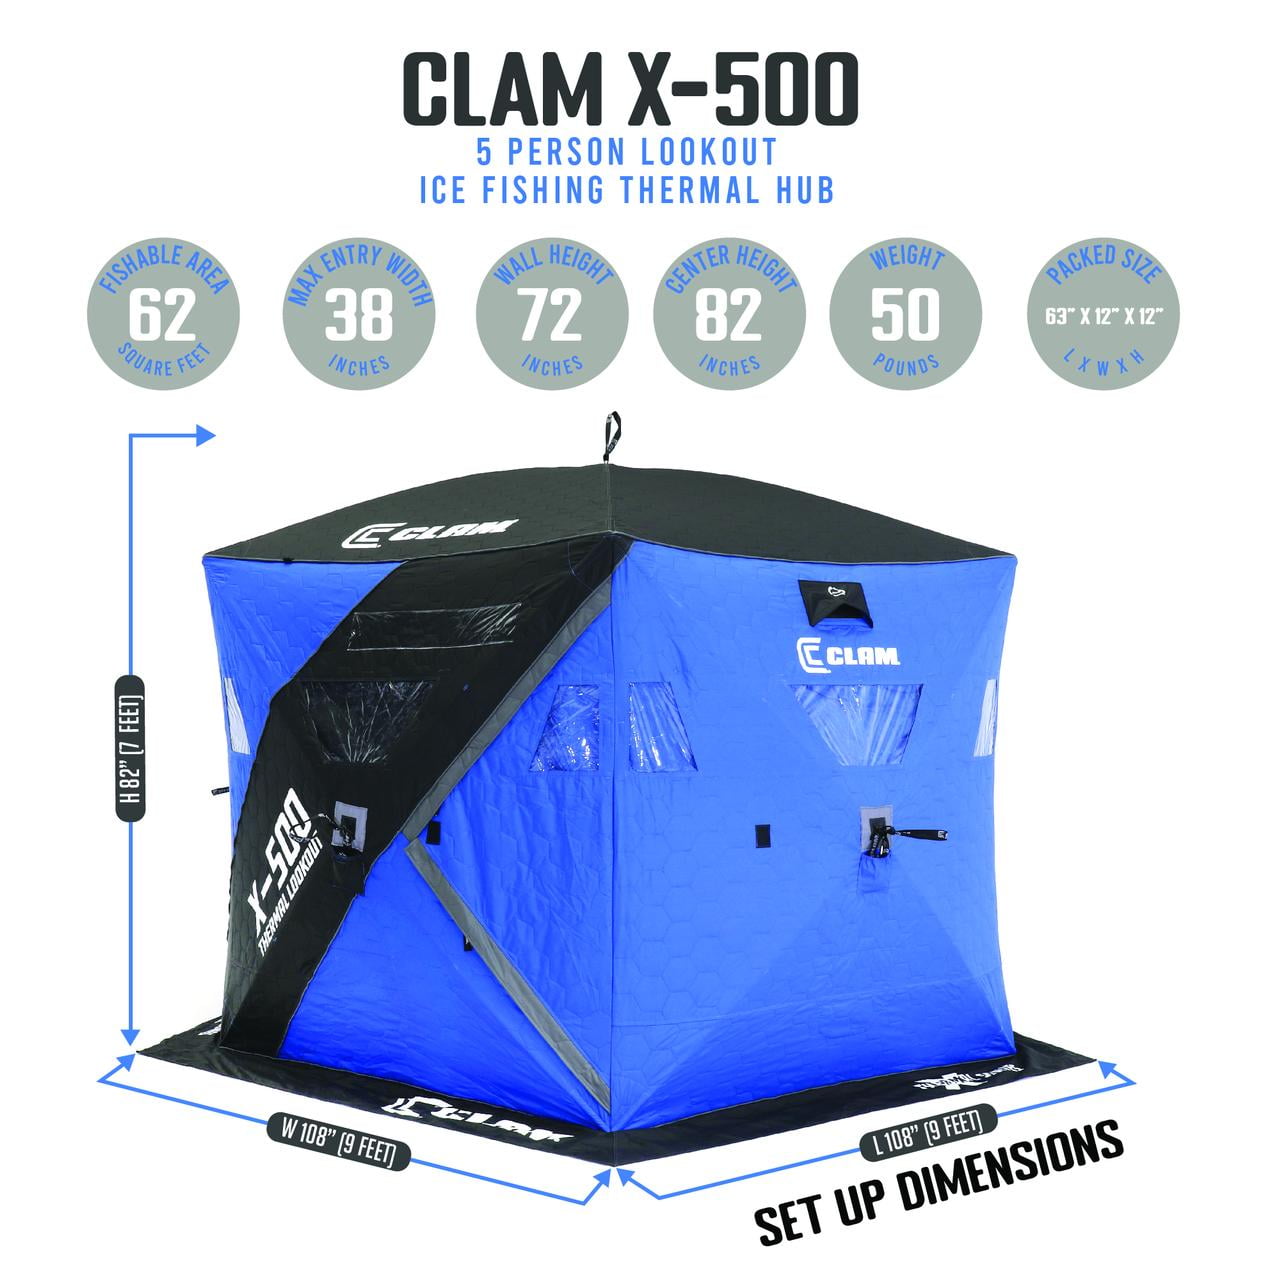 CLAM X-400 Portable 4 Person 8 Foot Ice Team Thermal Hub Shelter w